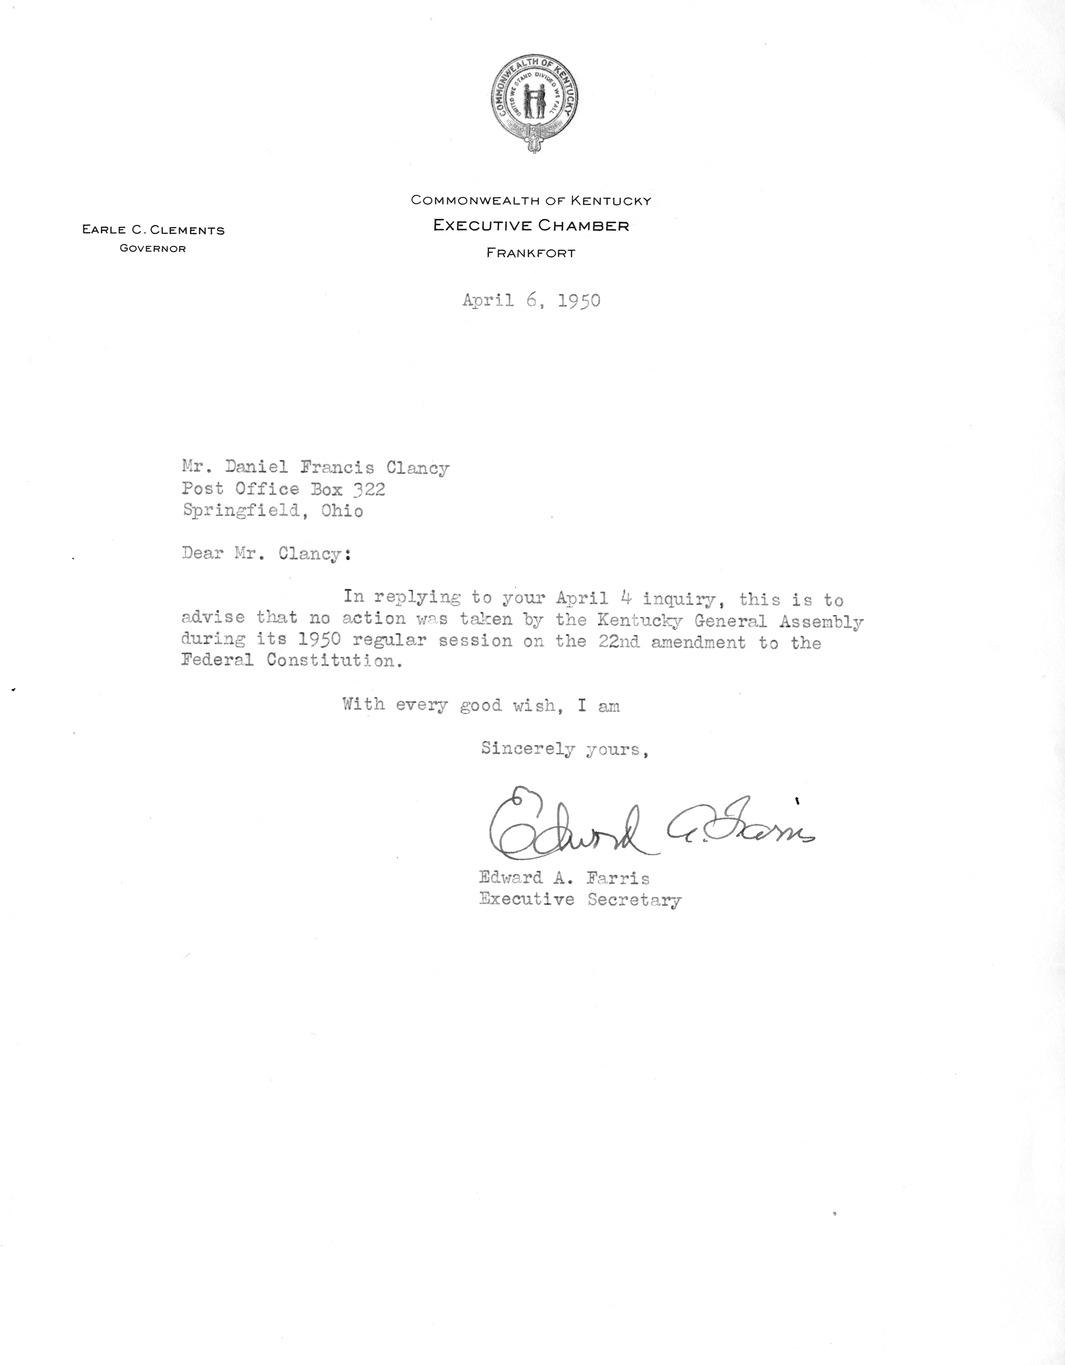 Letter from Edward A. Farris to Daniel F. Clancy